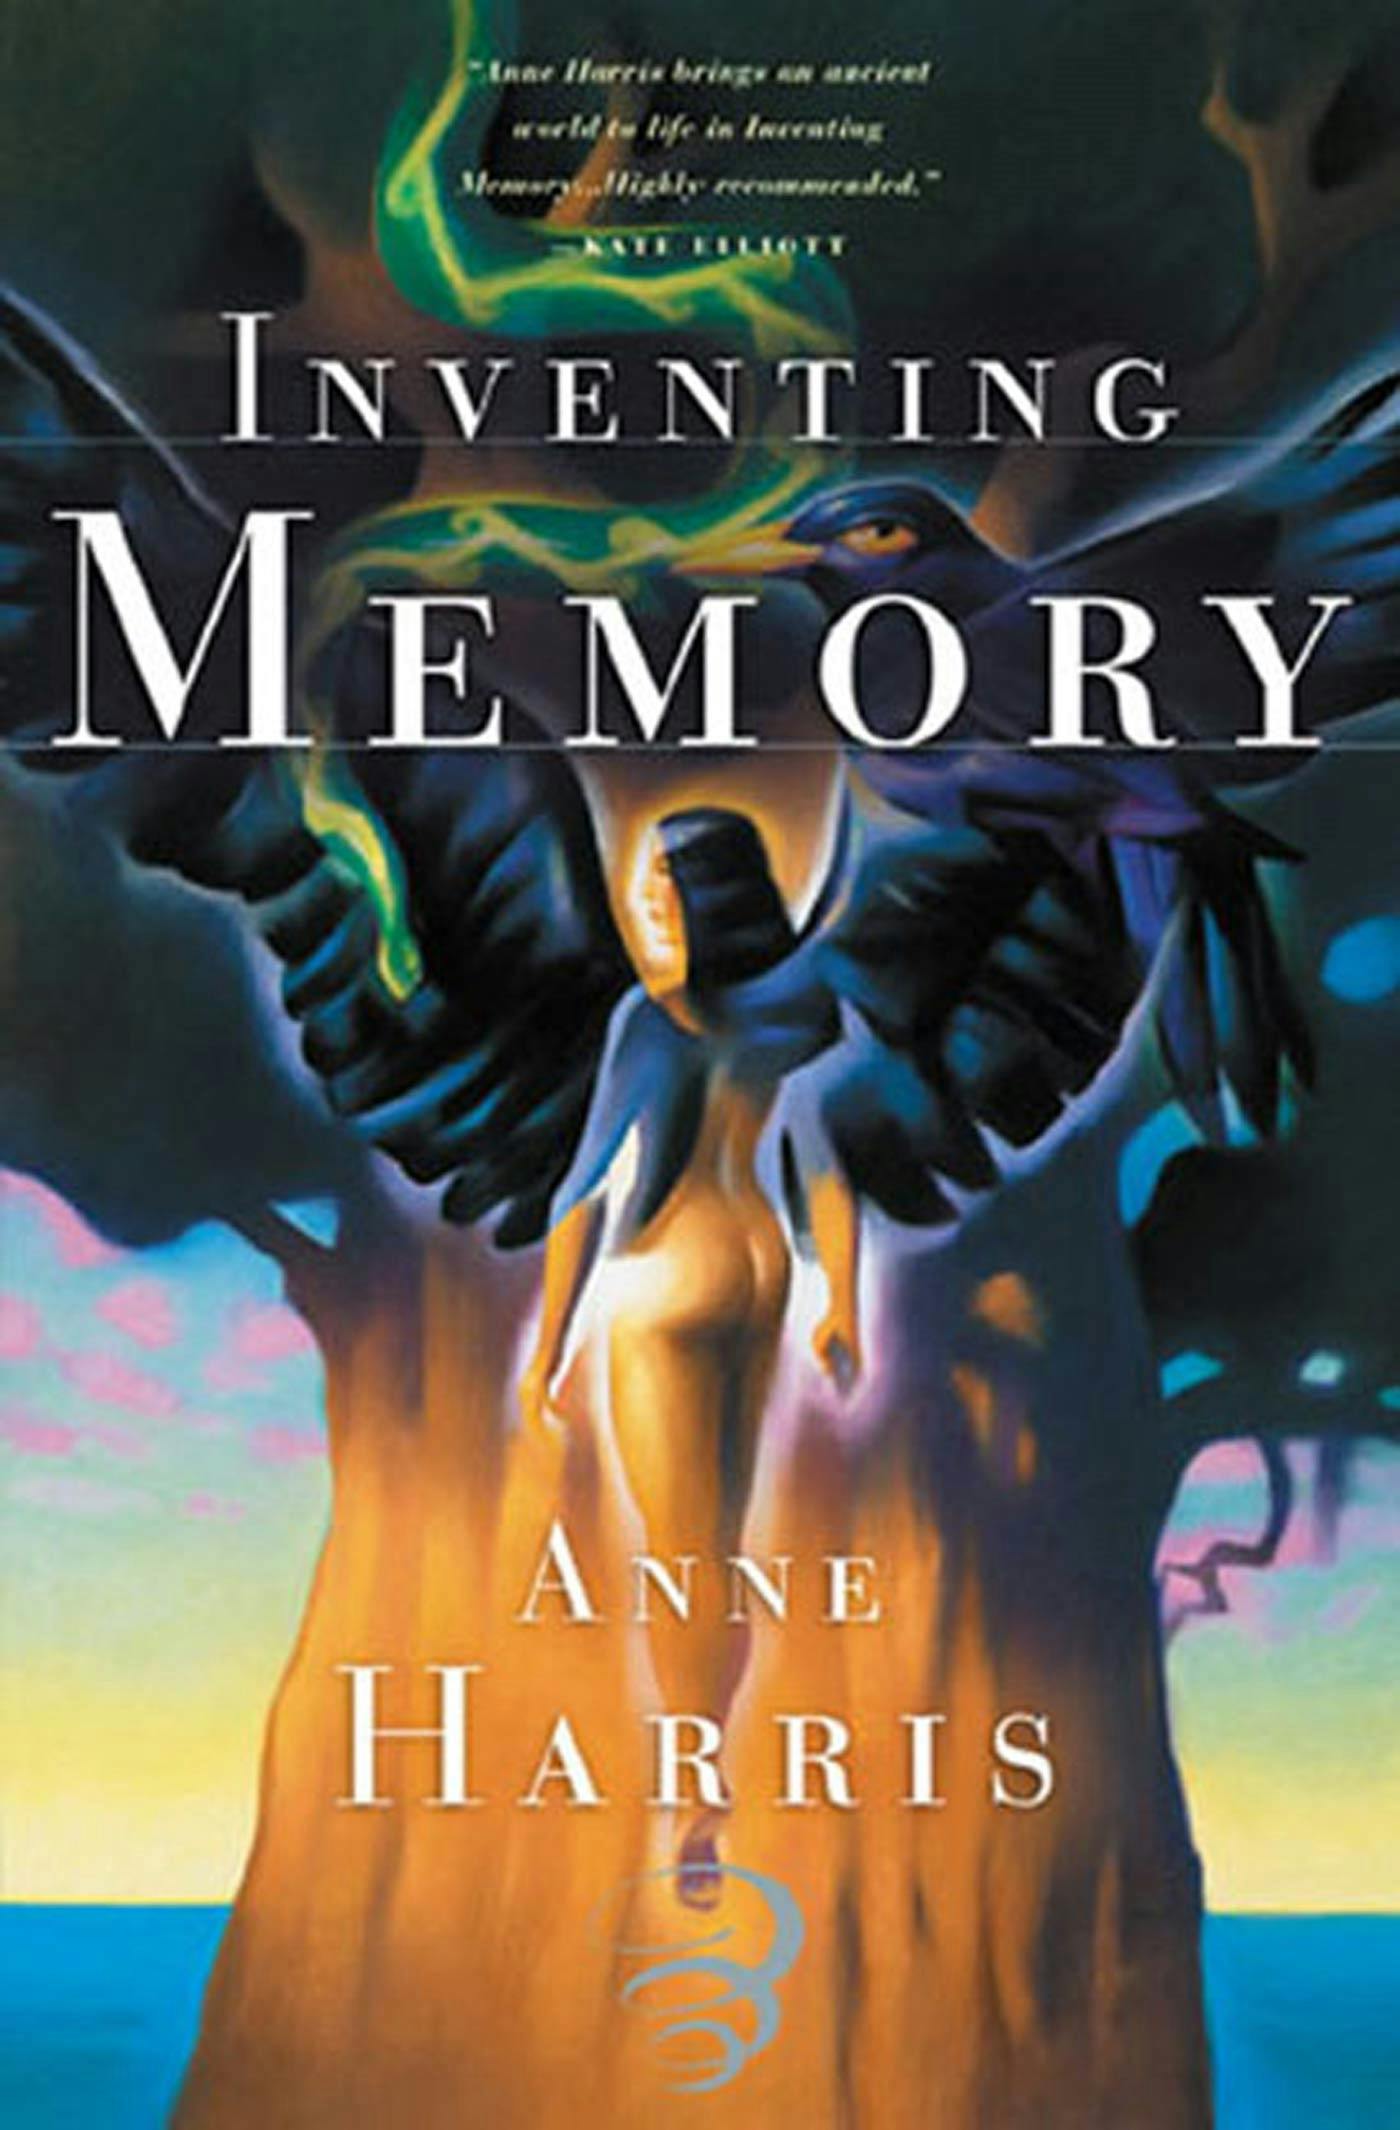 Cover for the book titled as: Inventing Memory